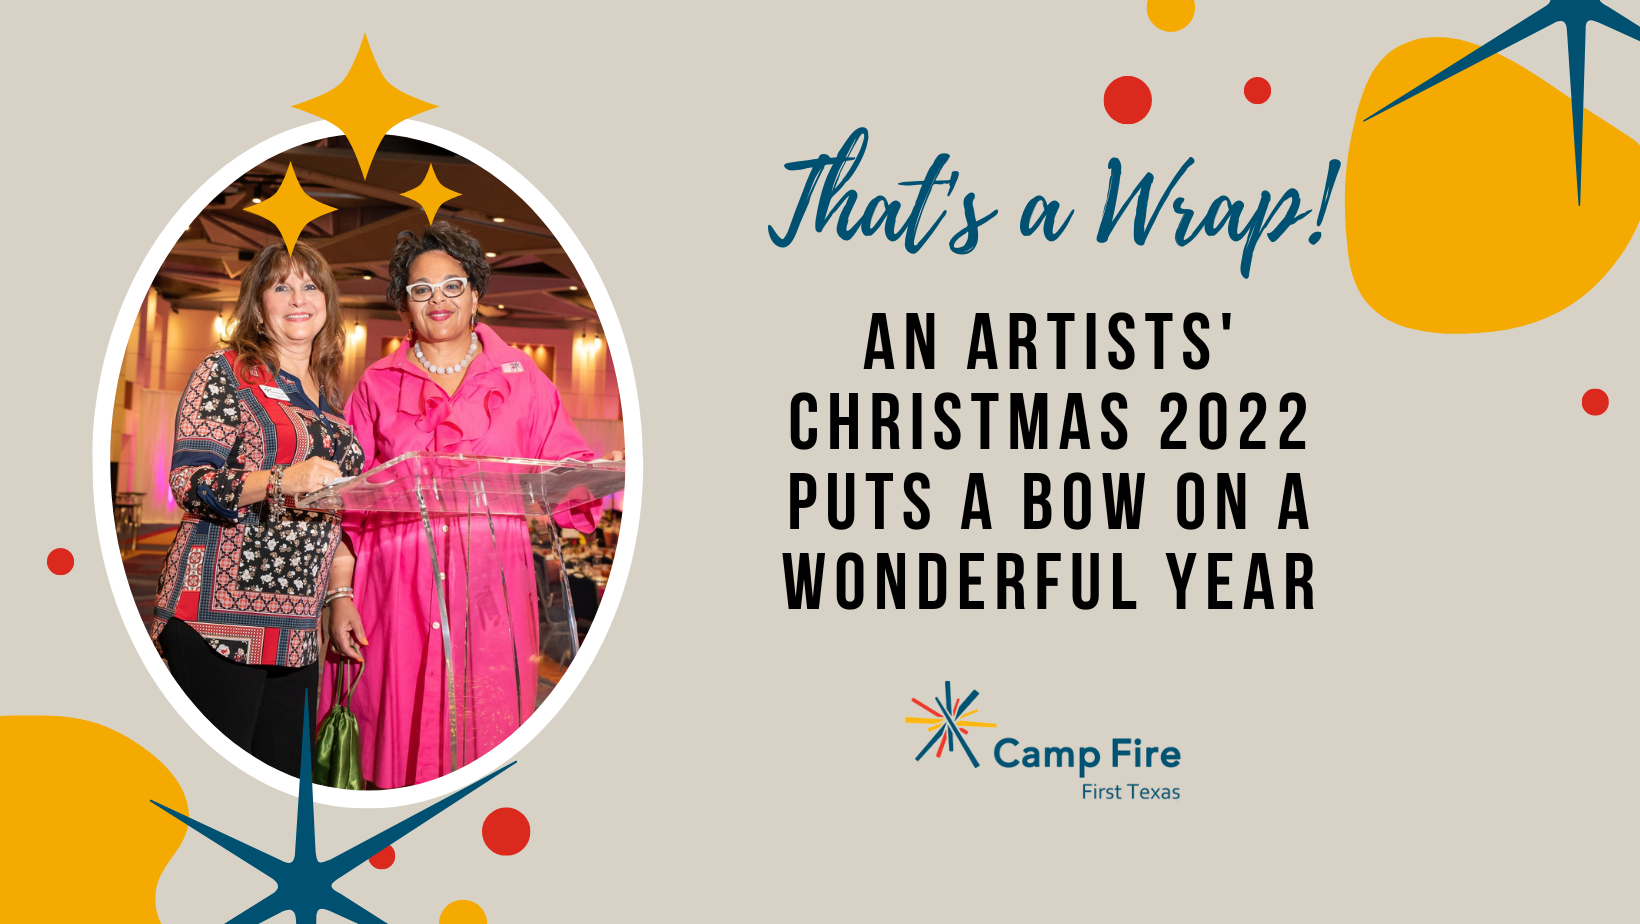 That's a Wrap! An Artists' Christmas 2022 Puts a Bow on a Wonderful Year for Camp Fire First Texas, a Camp Fire First Texas blog